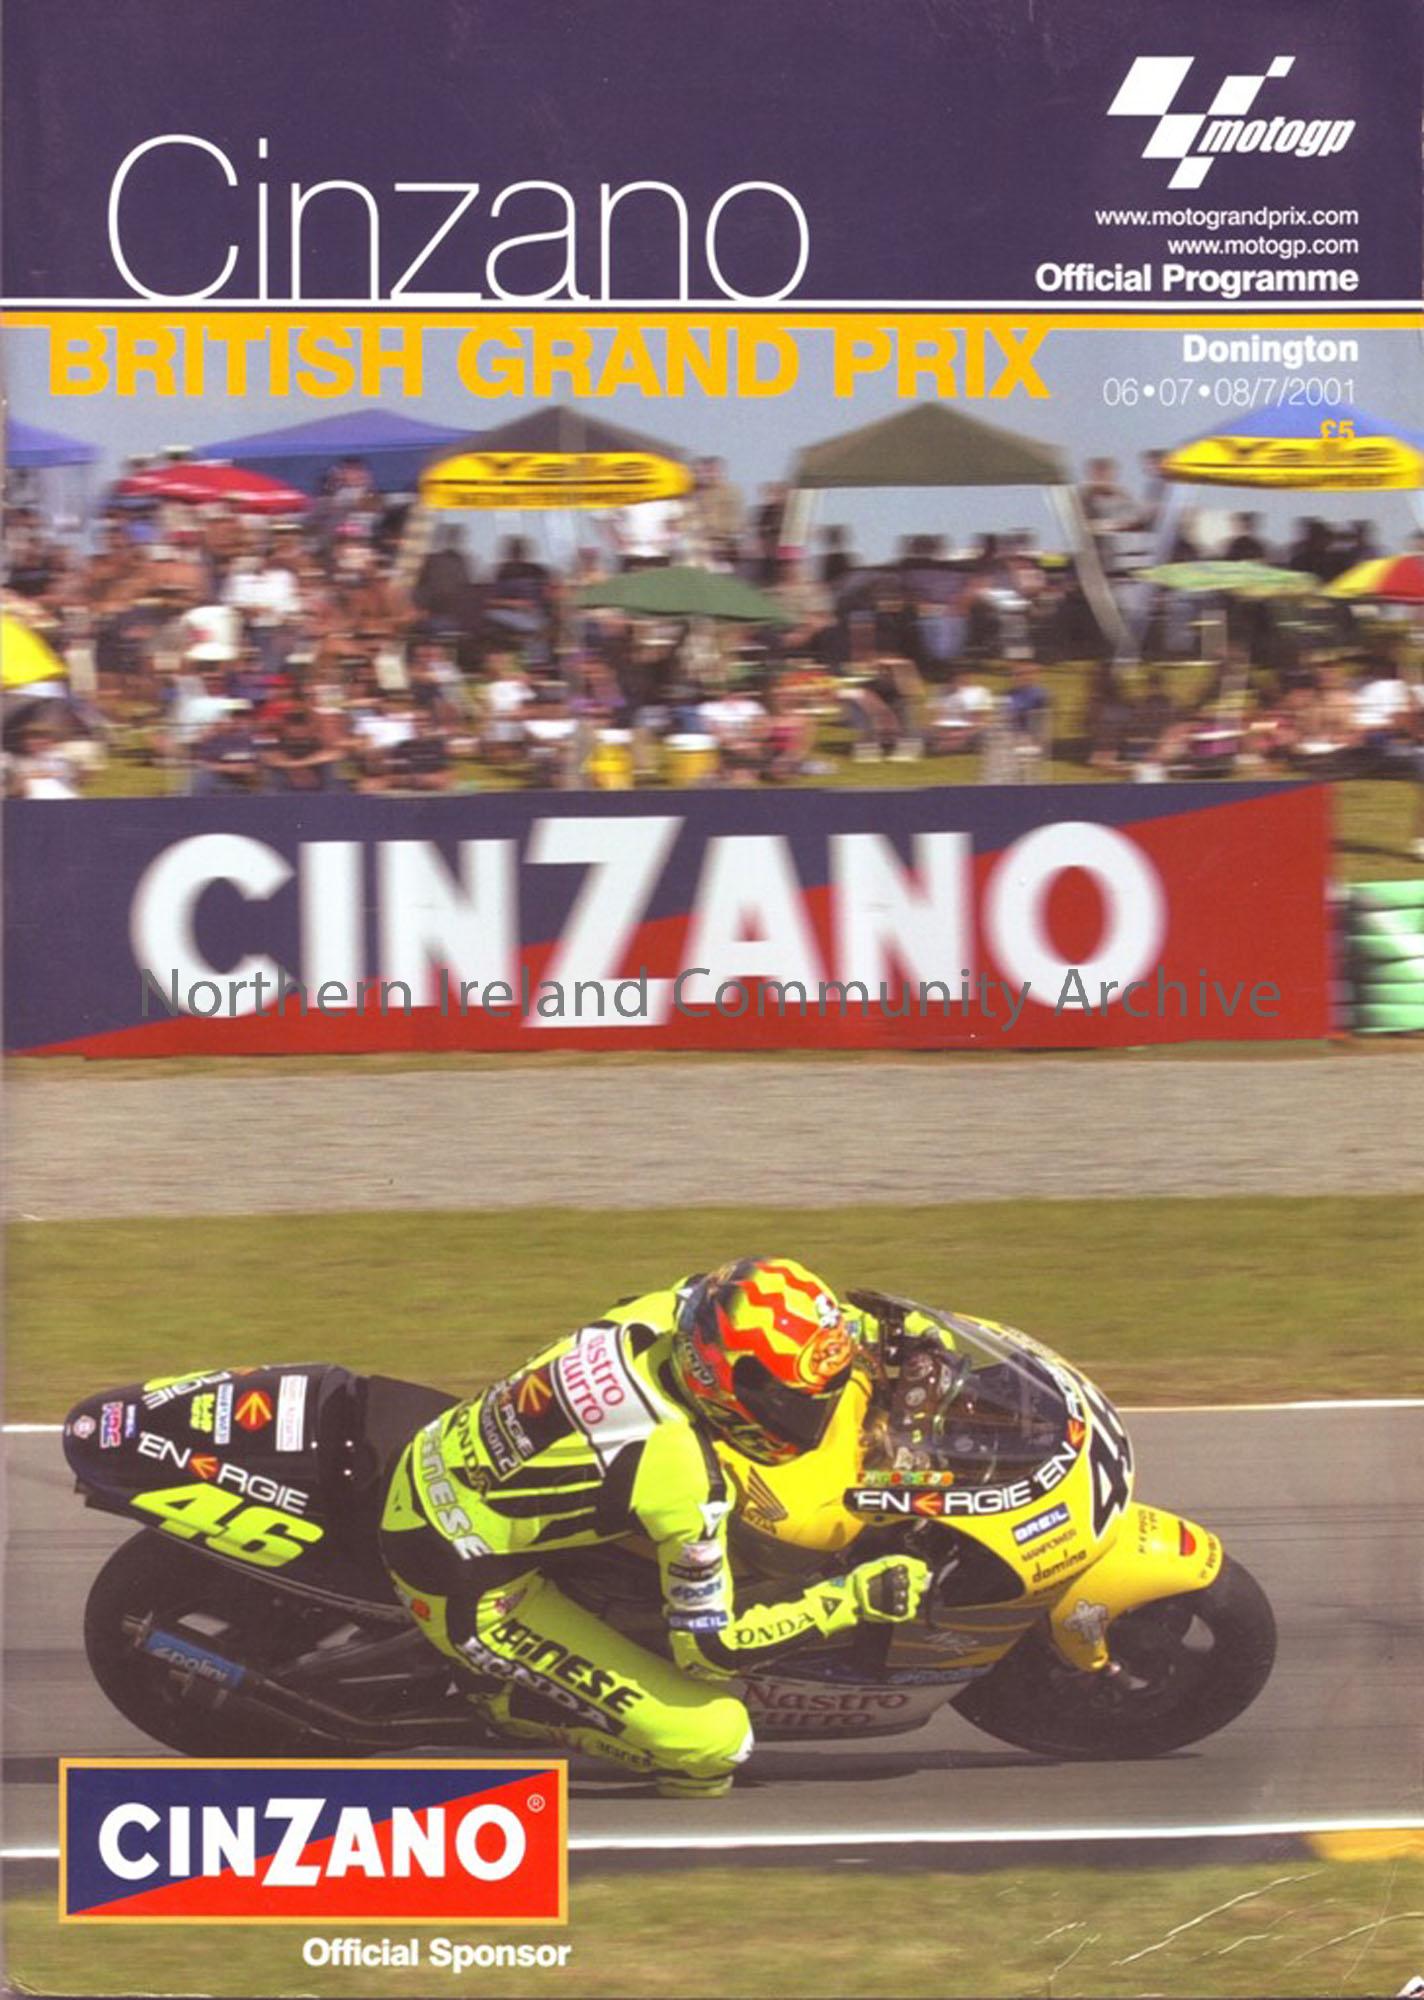 Cinzano British Grand Prix official programme. Includes lists of Entrants in each class and lap score charts. August 2001